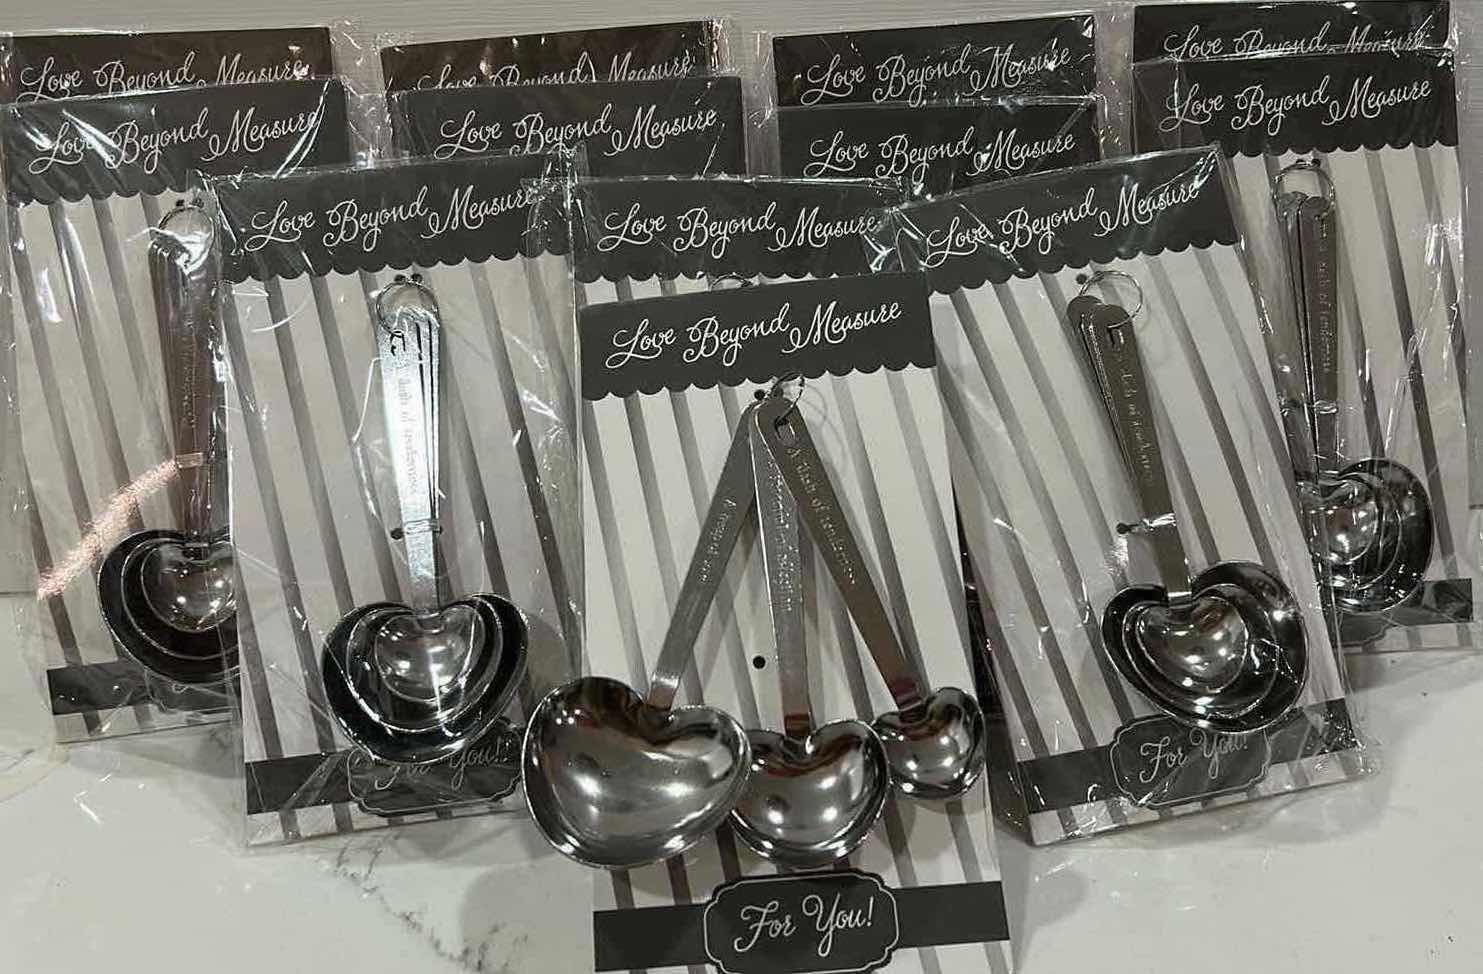 Photo 1 of 12 NEW “LOVE BEYOND MEASURE” MEASURING SPOON SETS, A DASH OF TENDERNESS, A SPOONFUL OF AFFECTION AND A HEAP OF LOVE